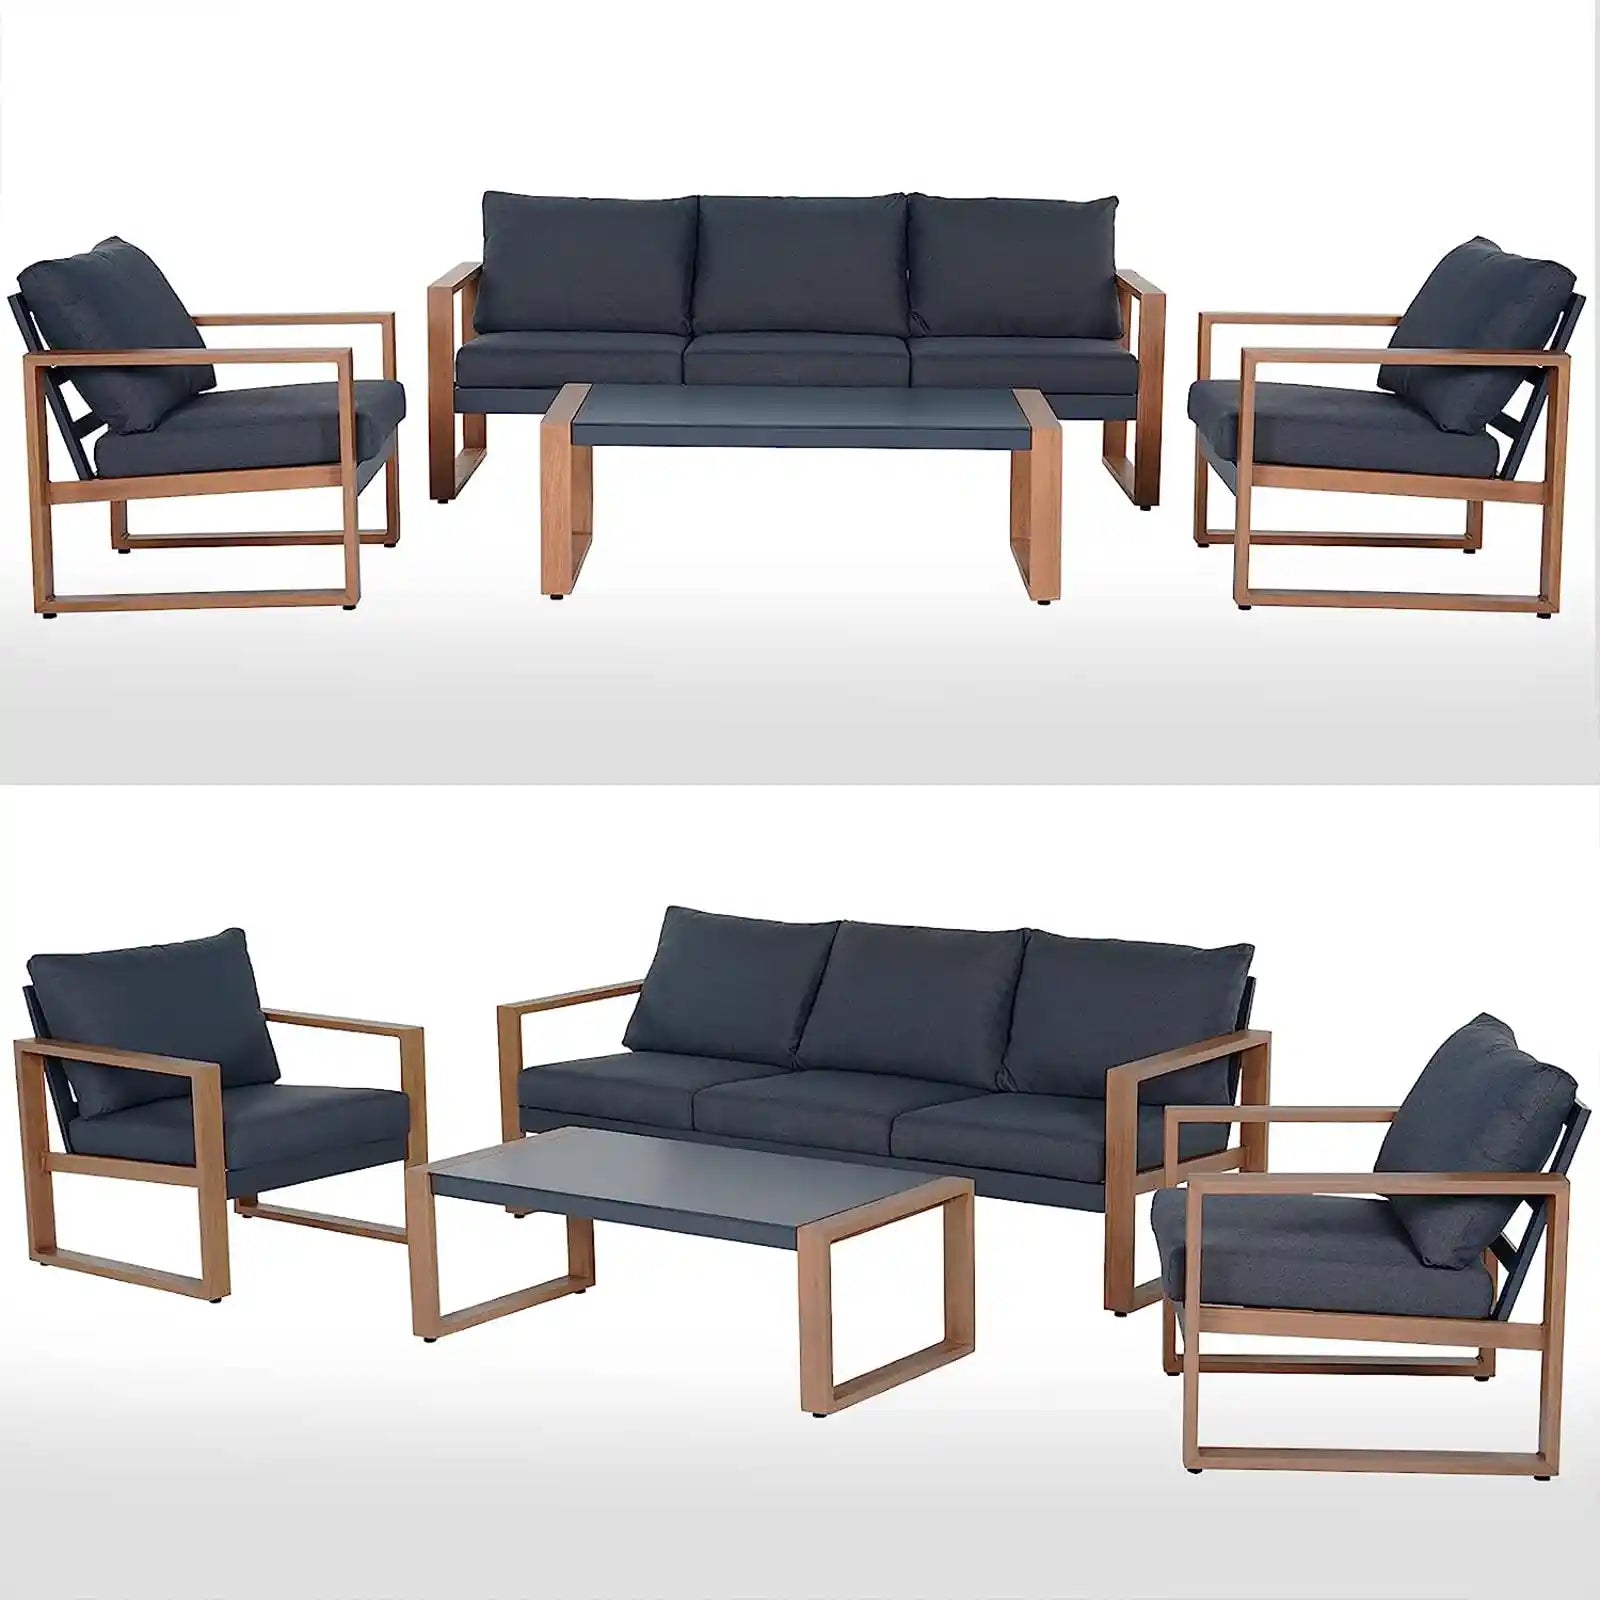 Modern Outdoor 4 Pieces Duisburg Aluminum Conversation Sets,Faux Wood Grain Aluminum Metal Sofa with Removable Cushion and Coffee Table for Garden Backyard Balcony